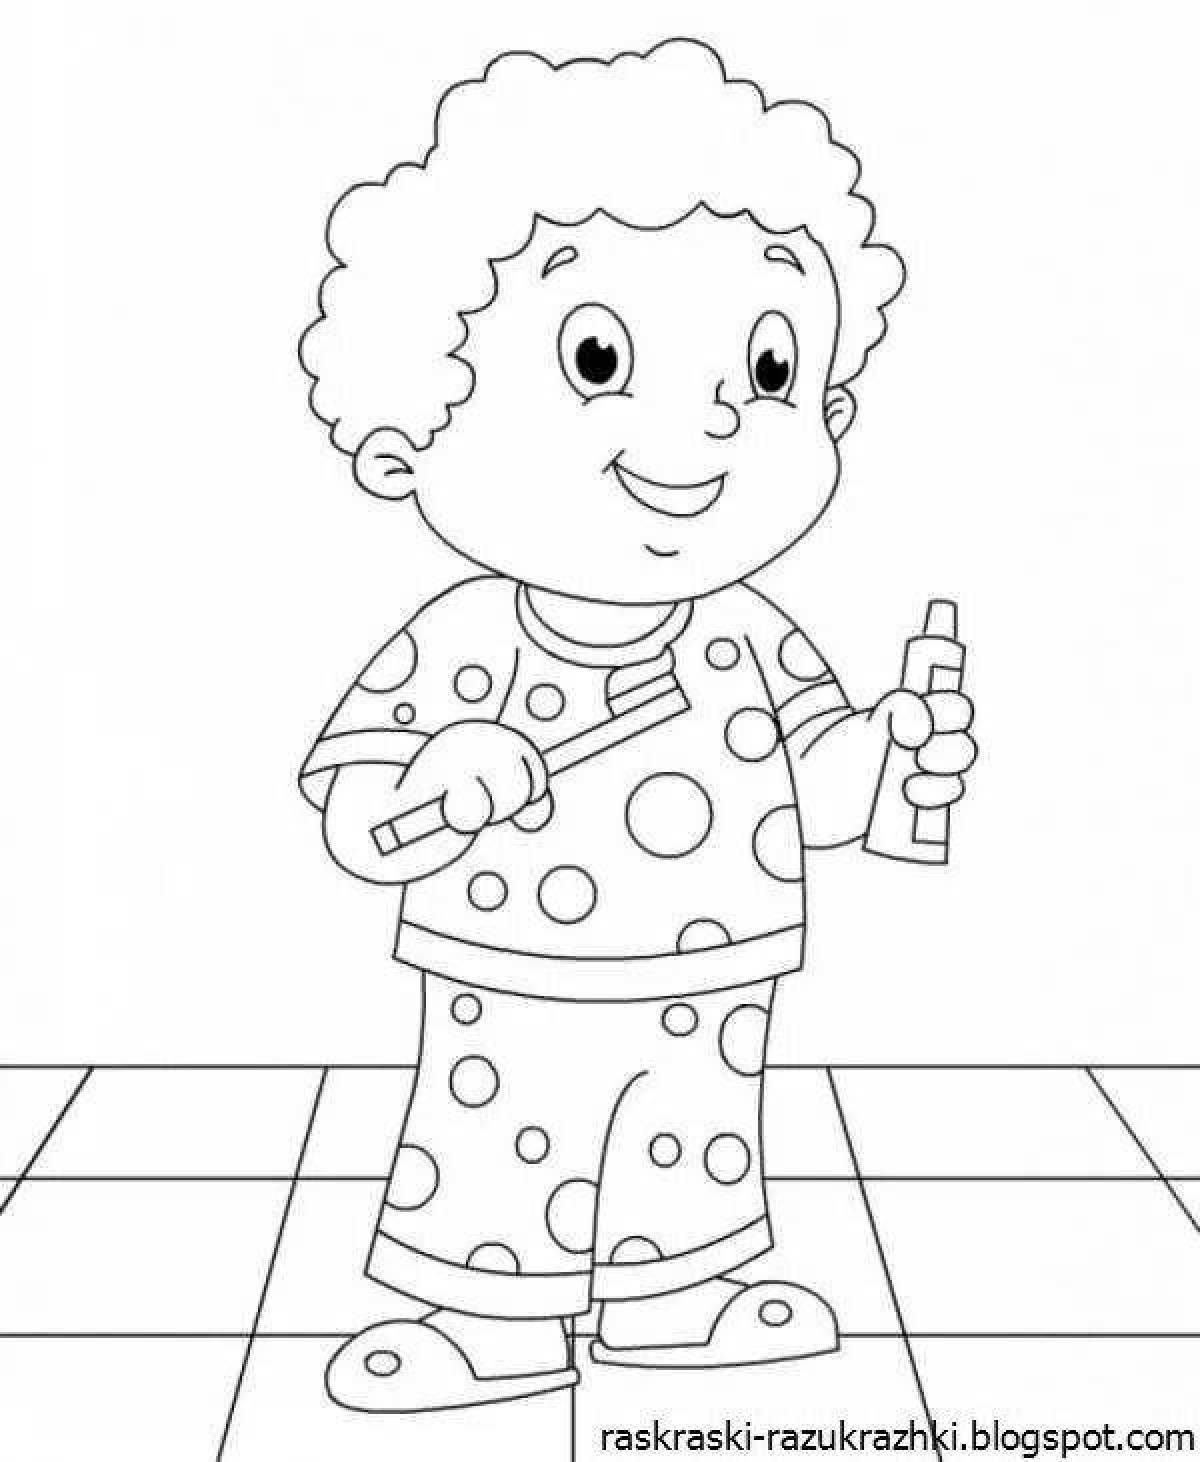 Color-brilliant coloring page person for 3-4 year olds